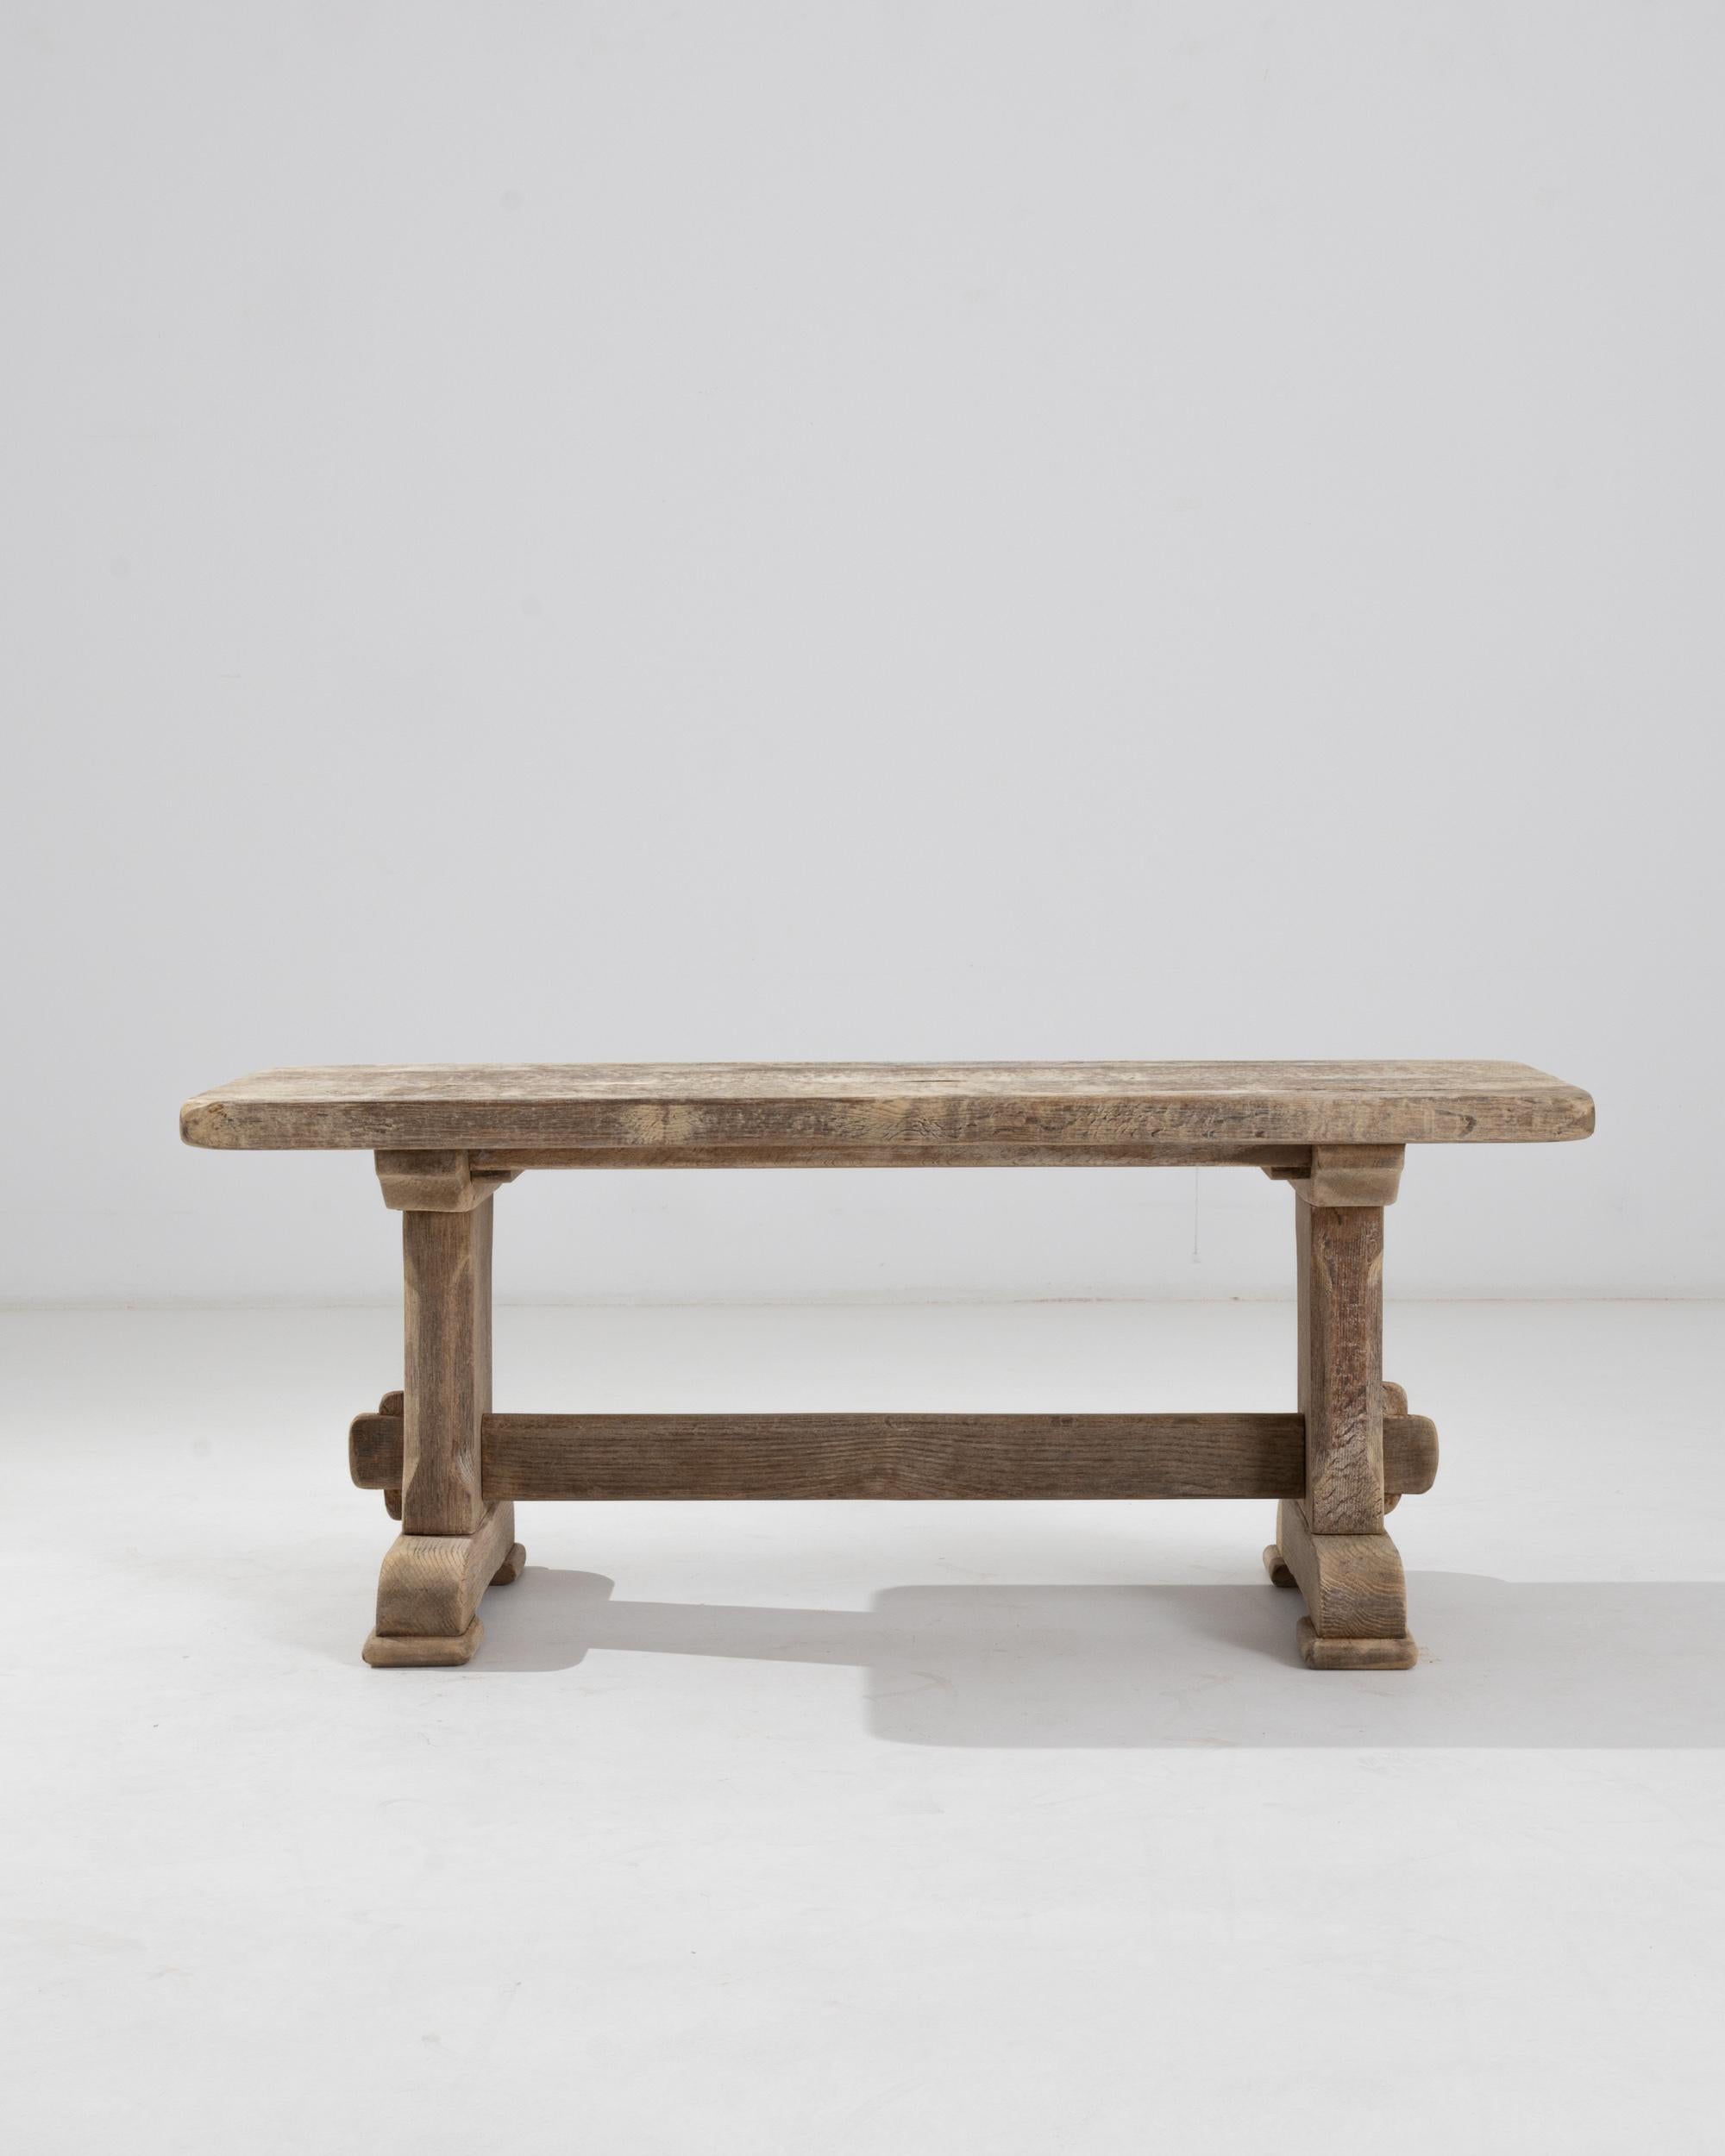 A 20th century coffee table made in Belgium. A simple wooden tabletop is raised on a carved trestle base with bracket feet that exude a solid rustic feel accentuated by the pale hue of the bleach oak finish.